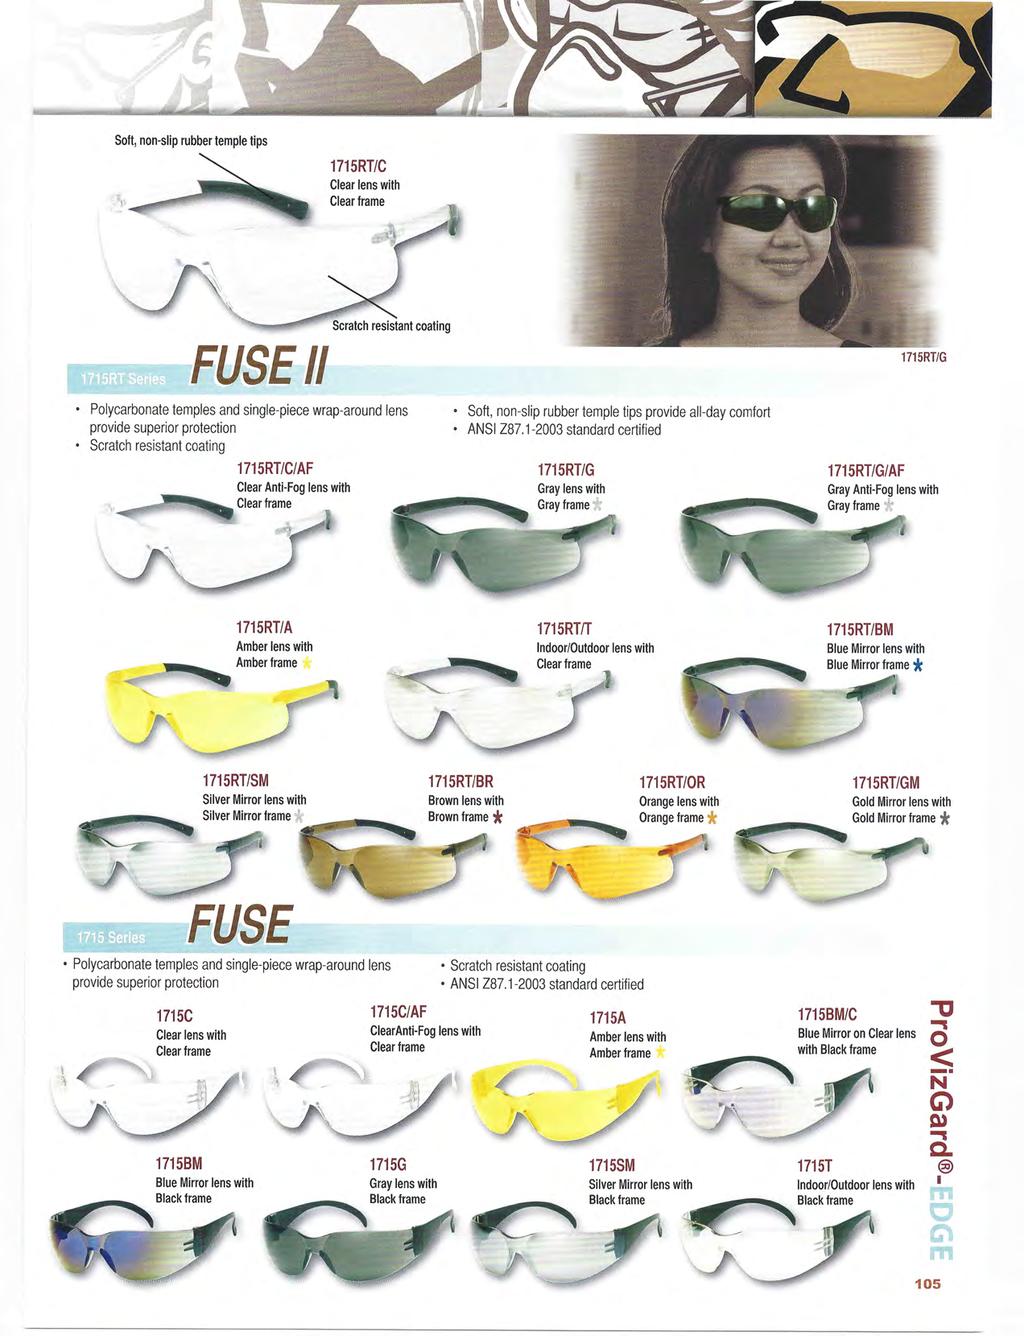 Solt, non-slip rubber temple tips 1715RT/C Clear lens with Clear frame FUSE/I Polycarbonate temples and single-piece wrap-around lens provide superior protection Scratch resistant coating 1715RT/C/AF